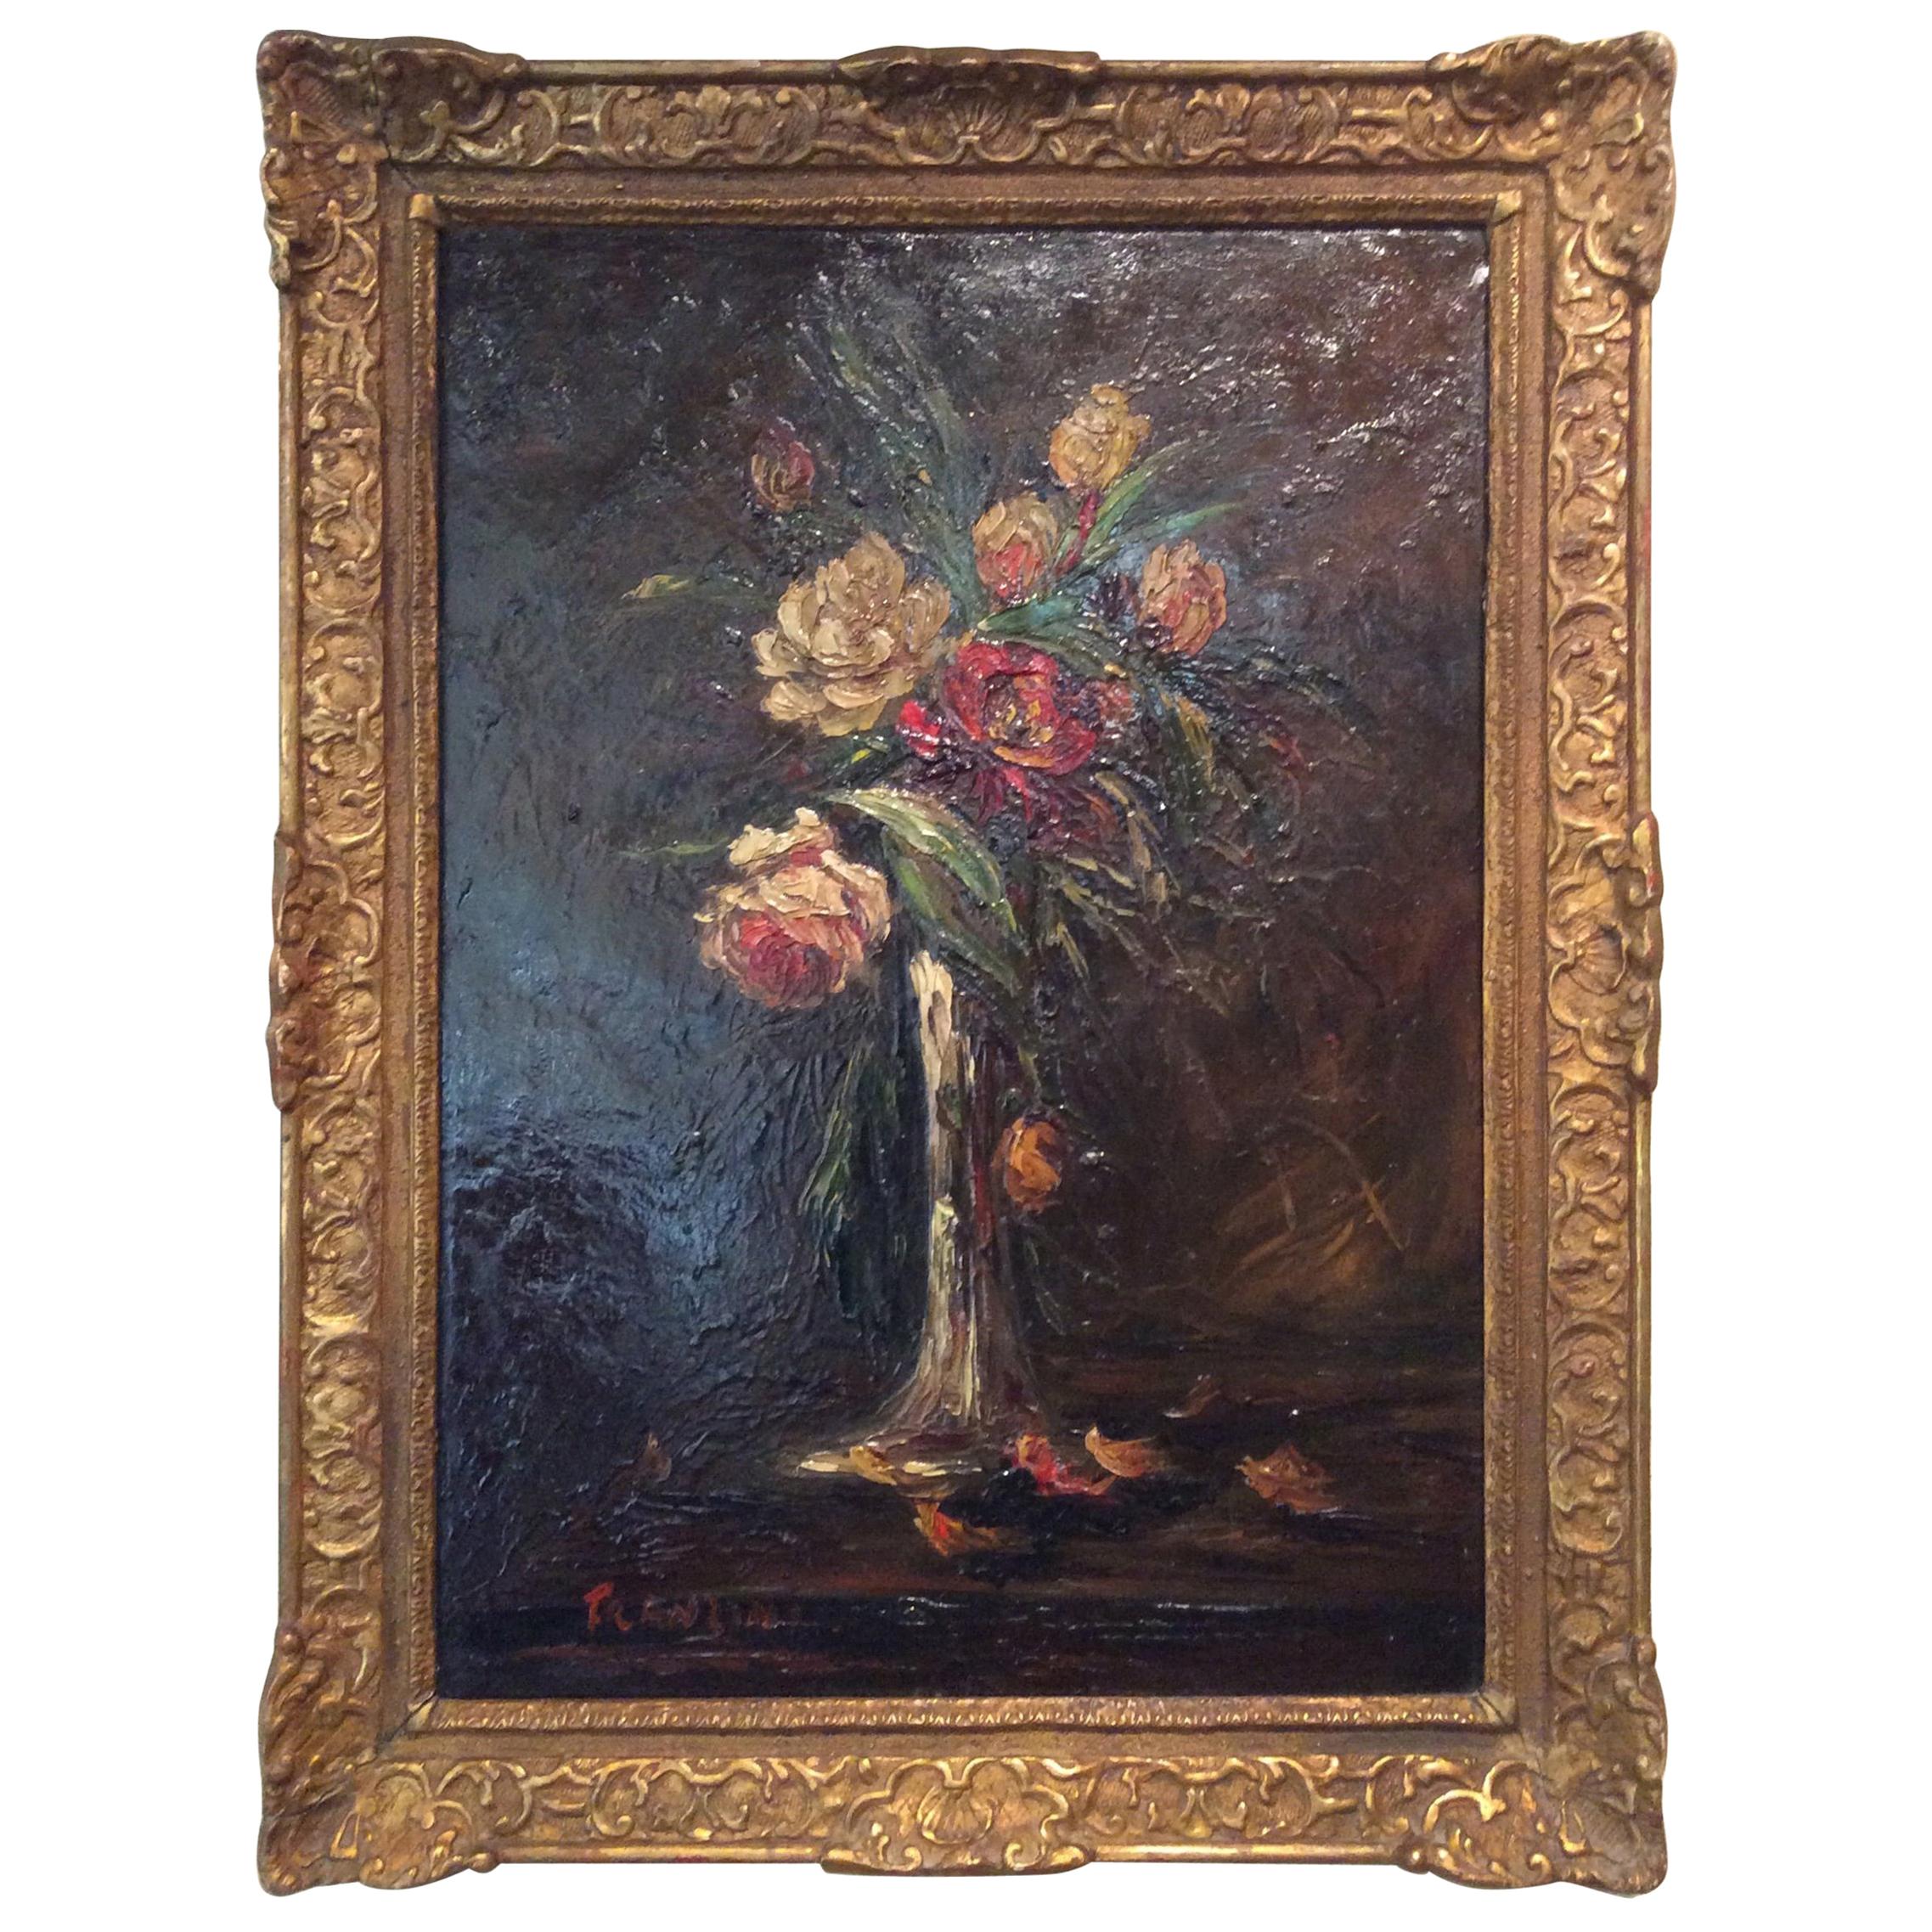 Ornately Giltwood Framed Floral Painting by Charles Franzini D’issoncourt